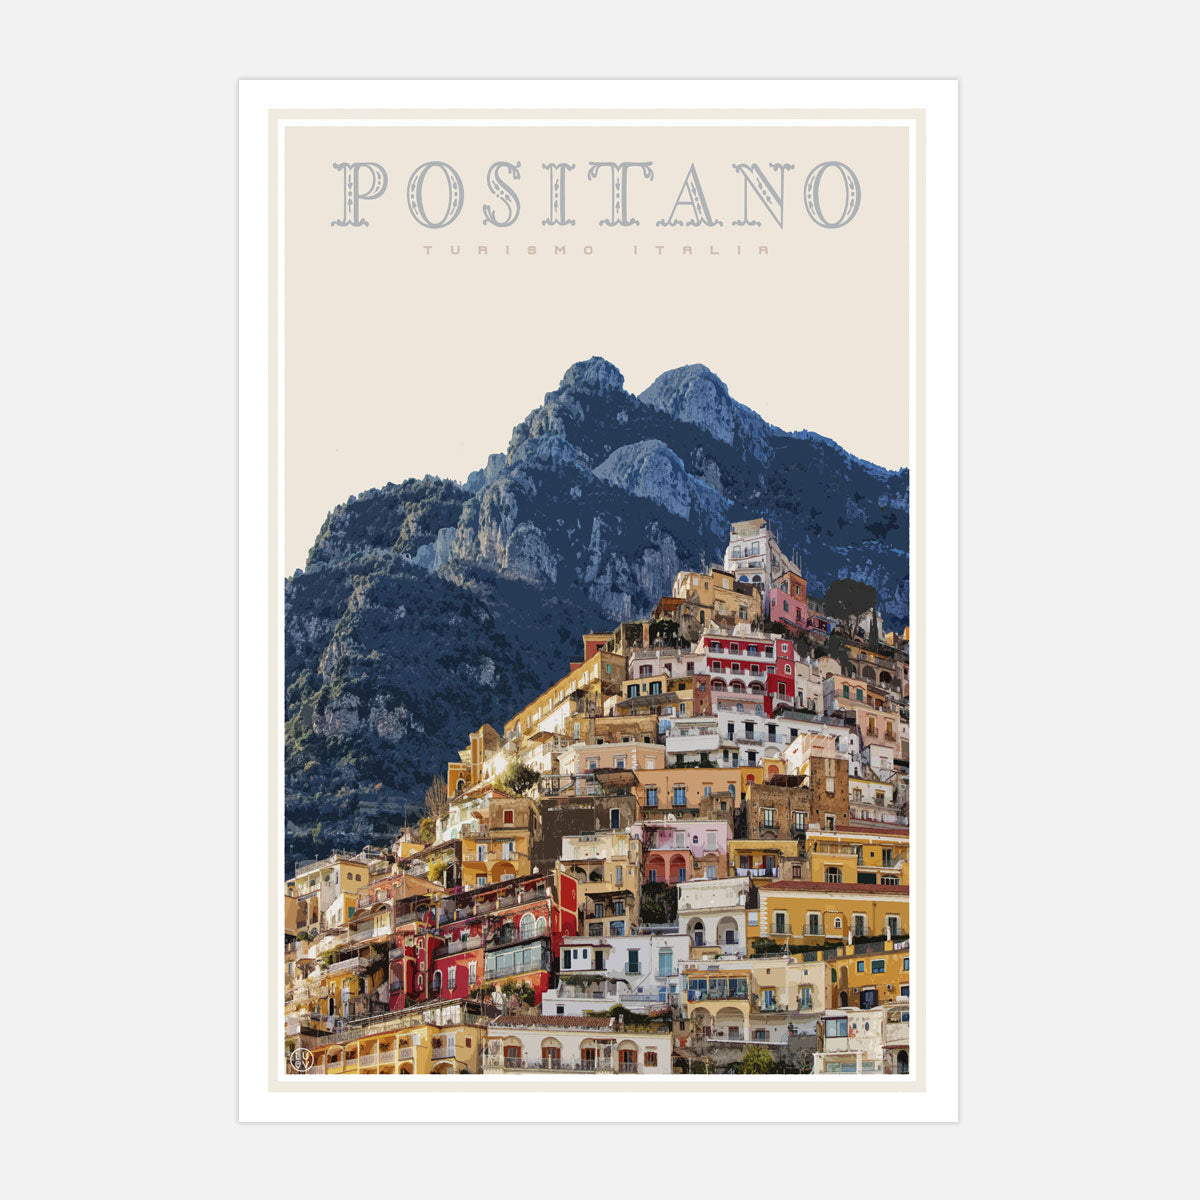 Positano travel style poster by places we luv